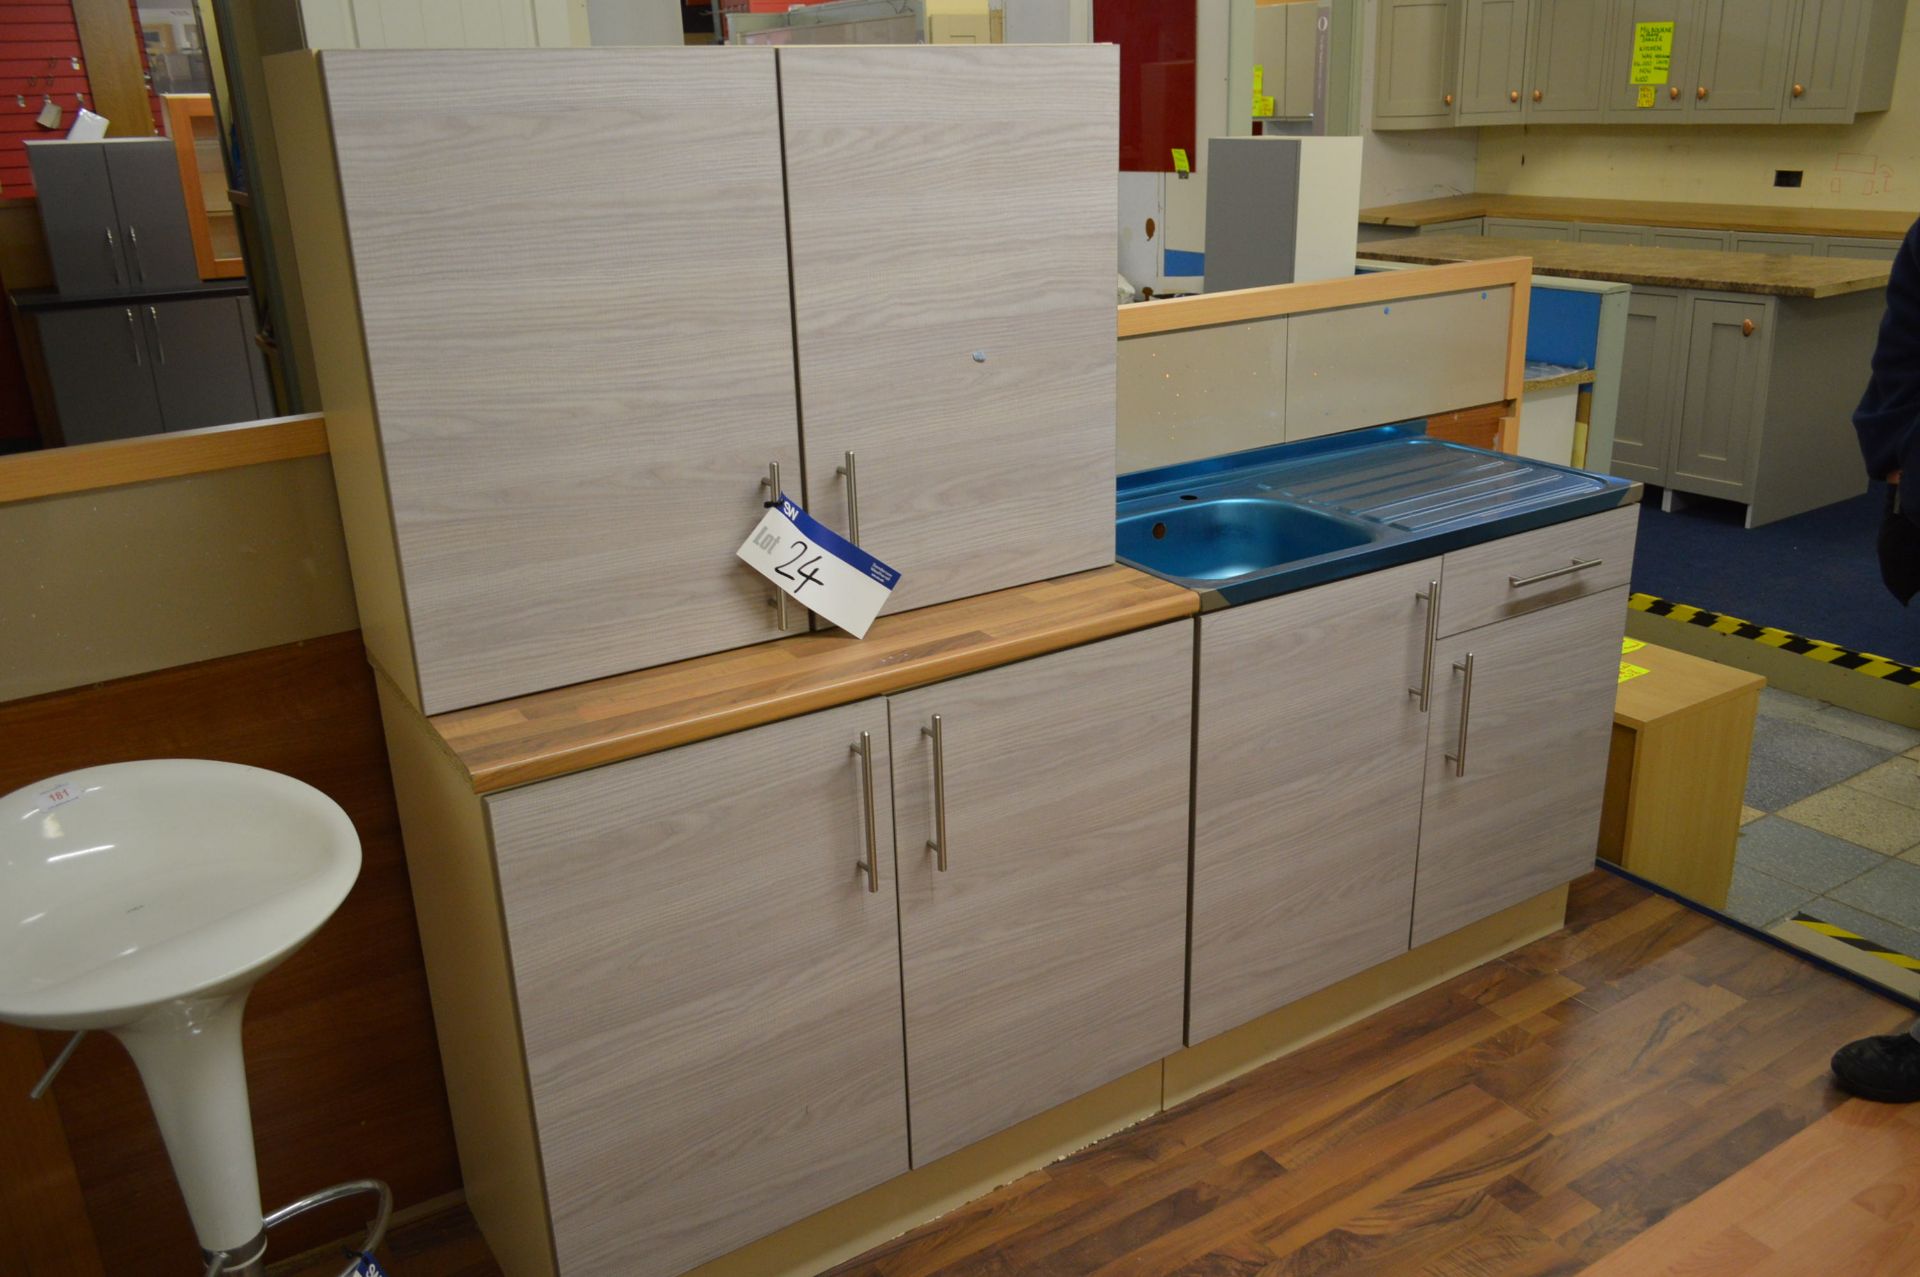 Driftwood Kitchen Unit, approx. 2m long, with work